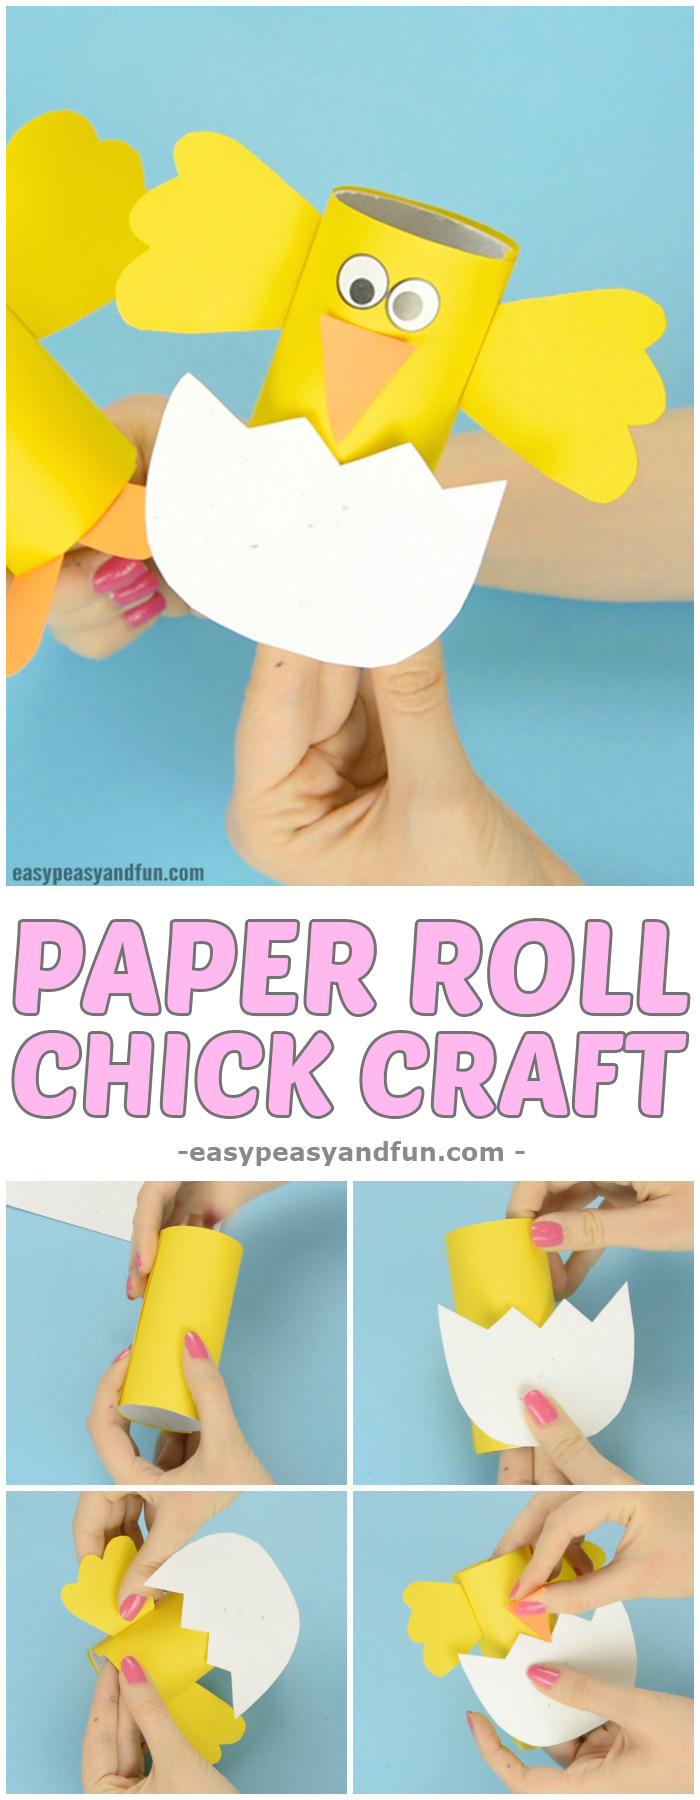 Chick paper scroll craft.  Fun Easter craft idea for kids.  #eastercrafts #chickcrafts #toilelpaperrollcrafts